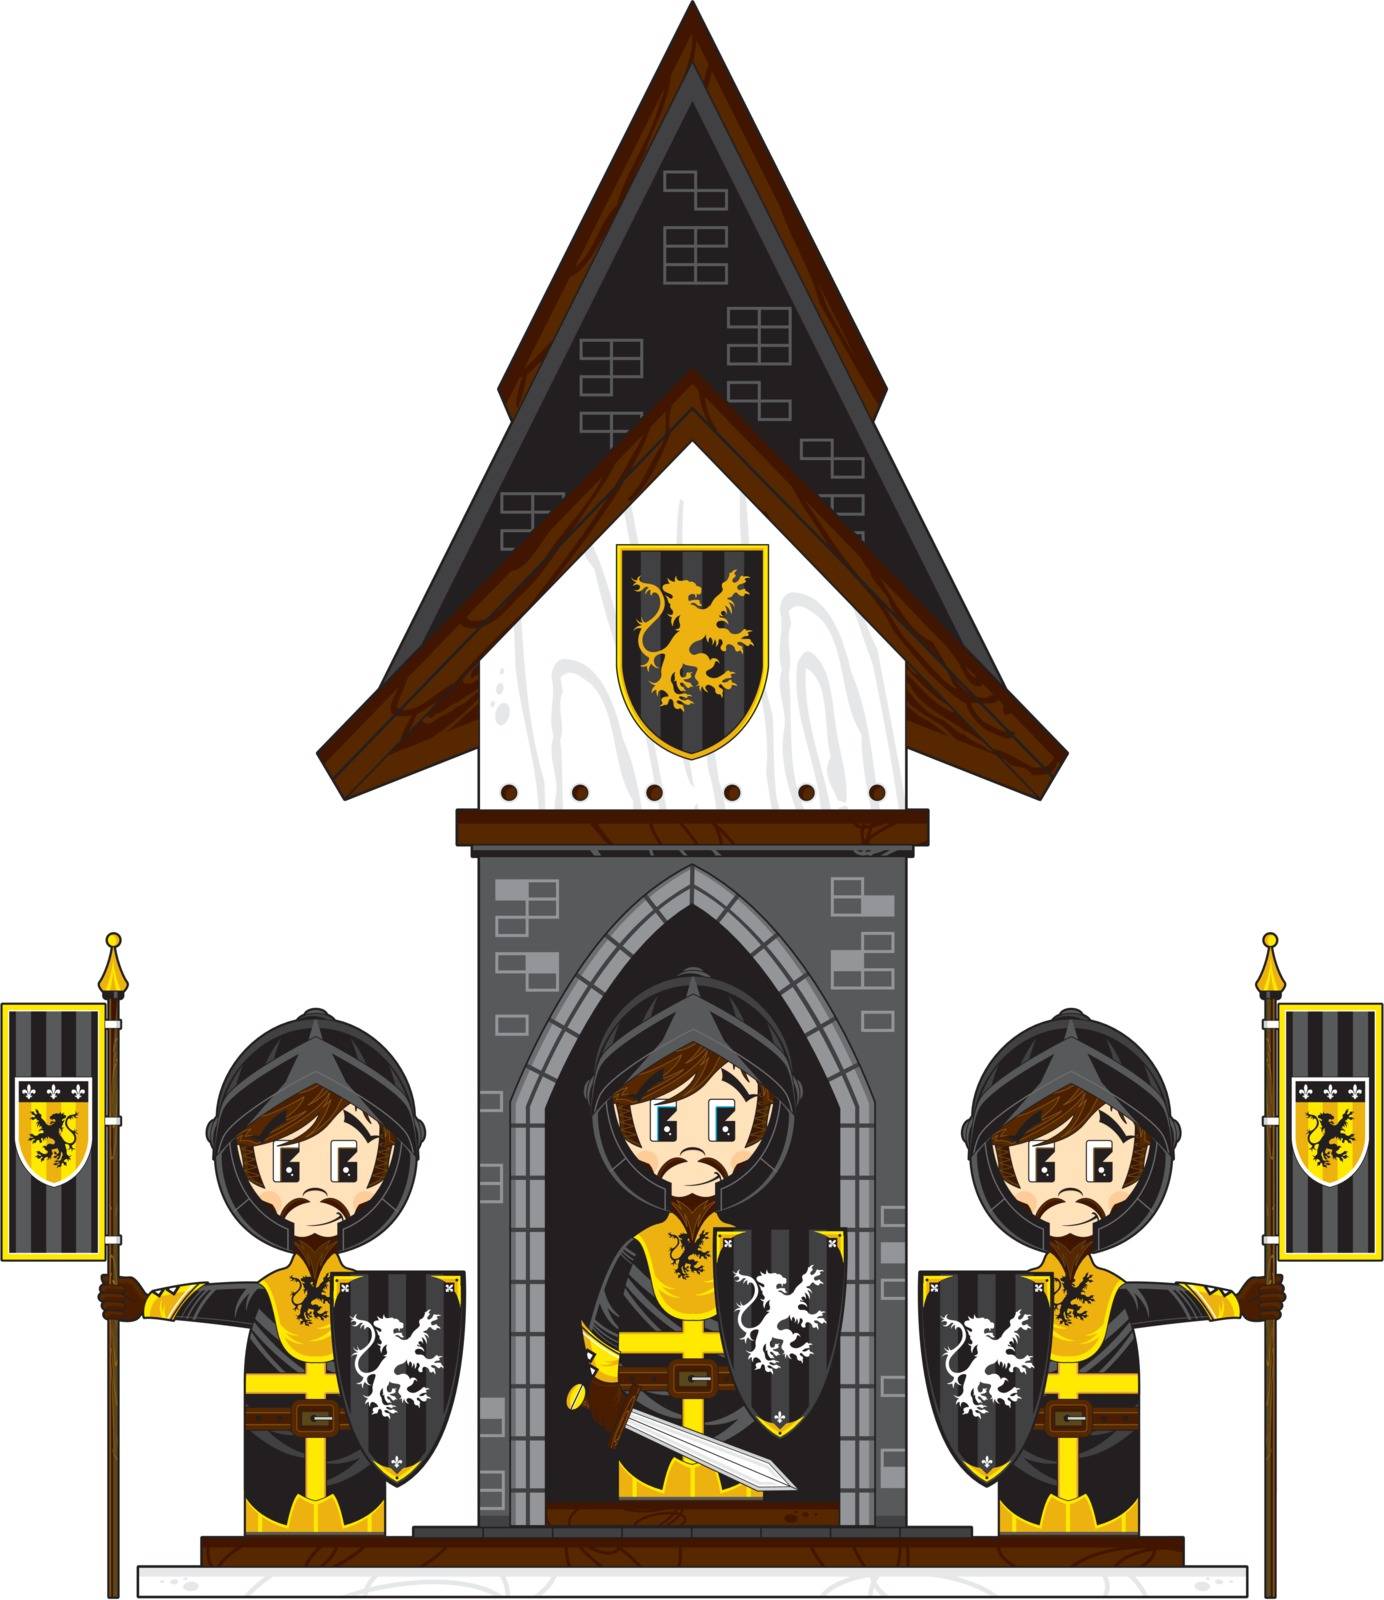 Cute Cartoon Medieval Crusader Knights with  Flags at Guard Post - by Mark Murphy Creative